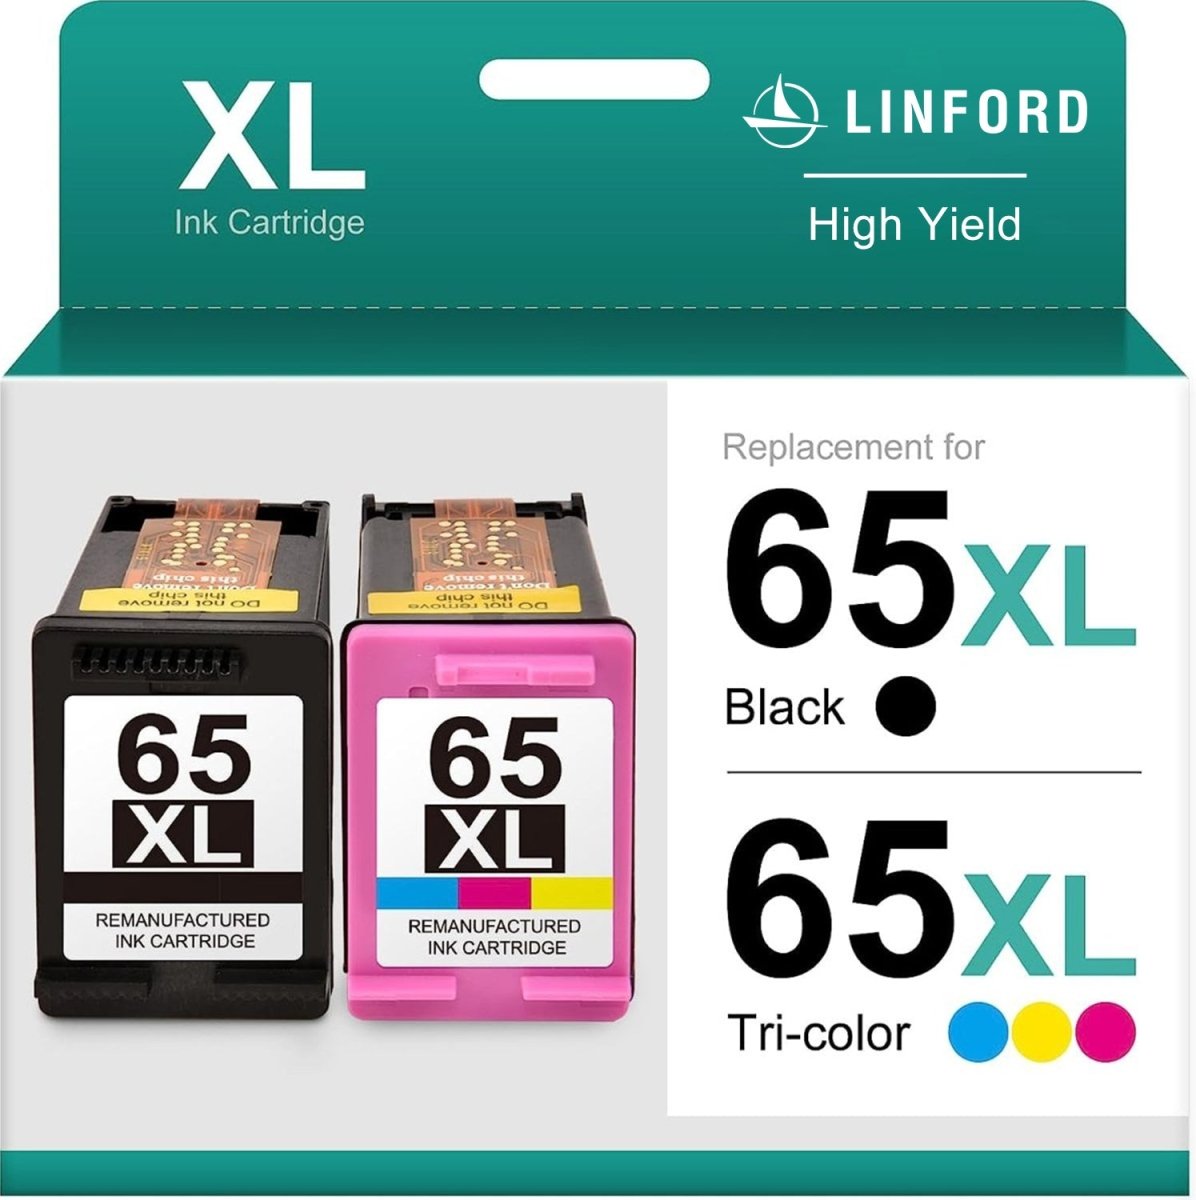 Remanufactured HP 65XL Ink Cartridge Combo Pack Replacement (Black, Tri-Color) - Linford Office:Printer Ink & Toner Cartridge